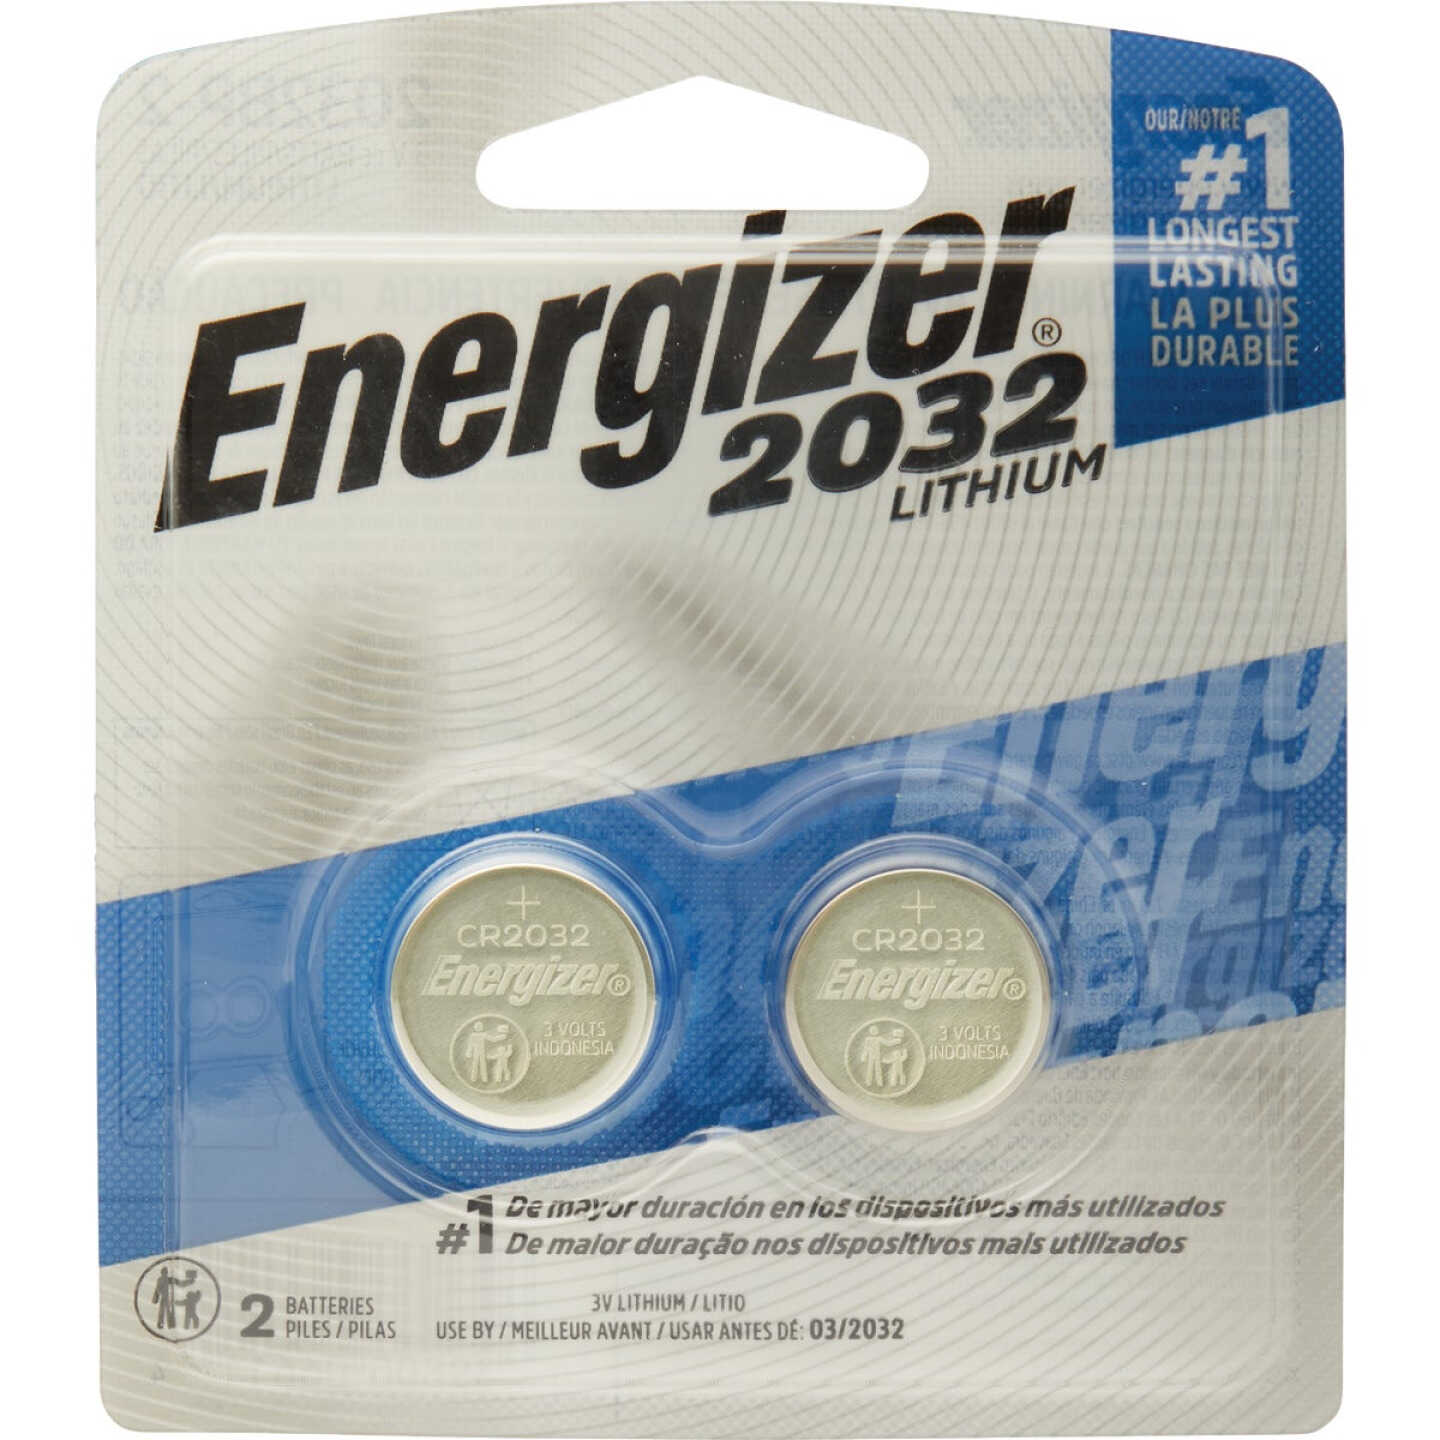 Energizer 2032 Lithium Coin Cell Battery (2-Pack) - McCabe Do it Center